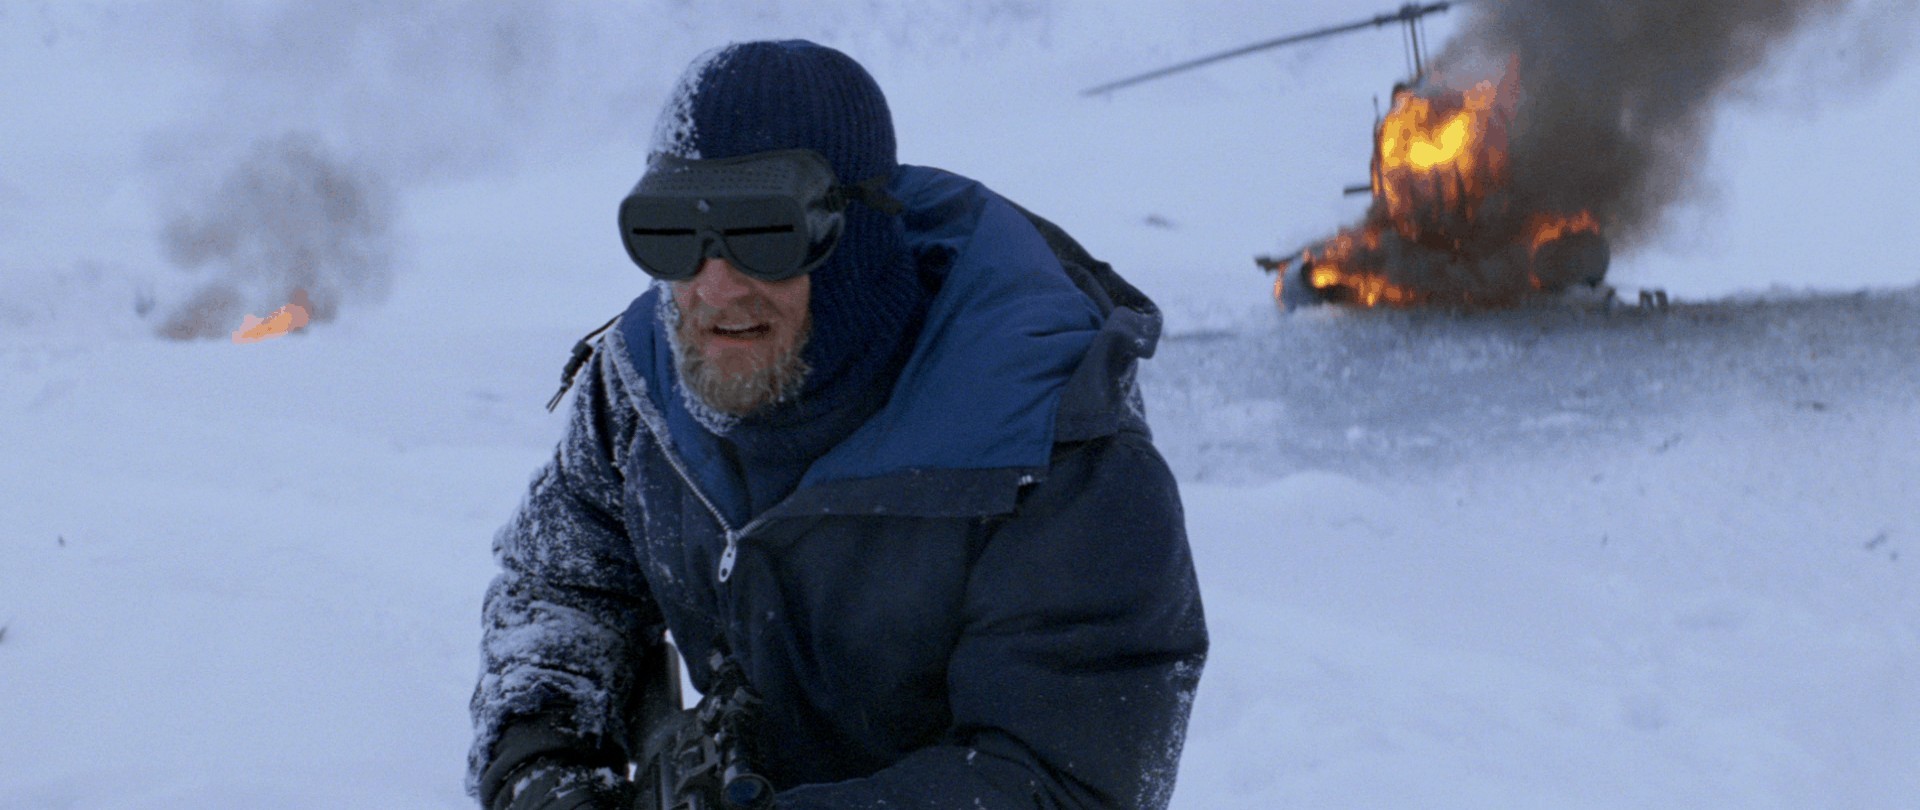 from the film The Thing